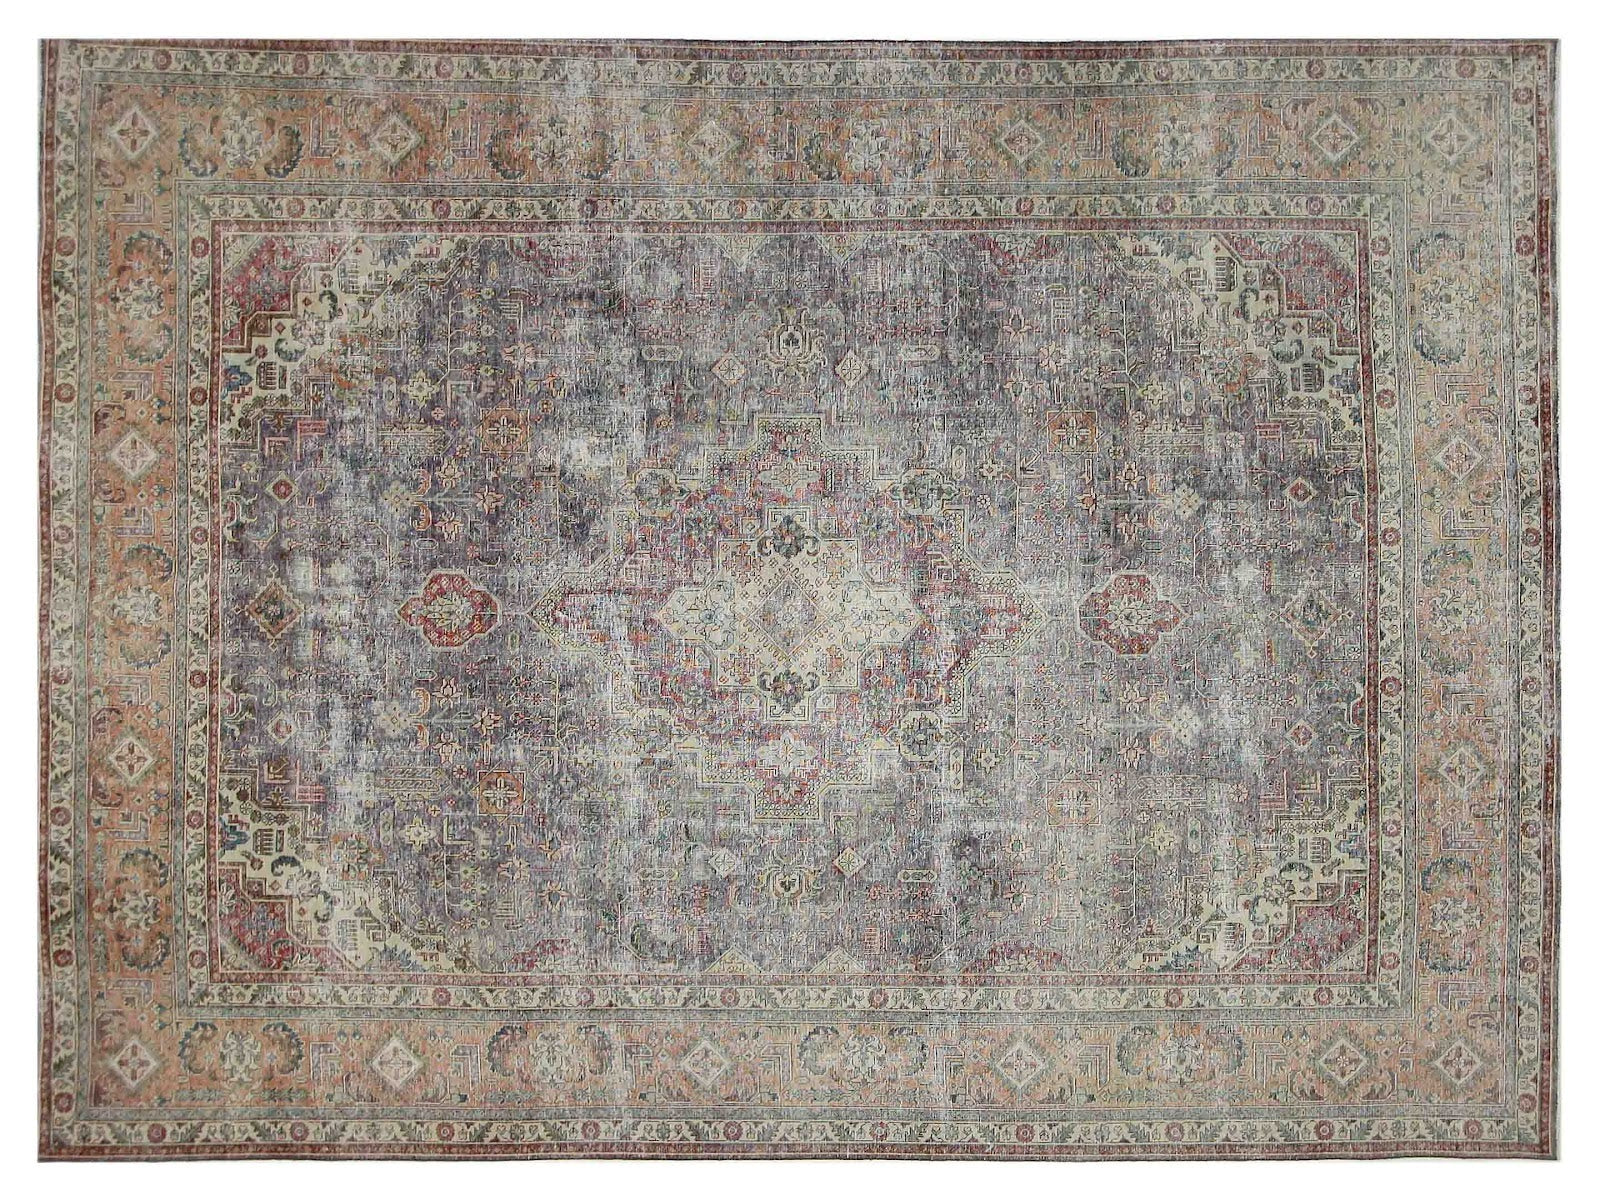 9x12 vintage Tabriz rug with a rich purple field and coral border, hand-knotted in 100% wool.